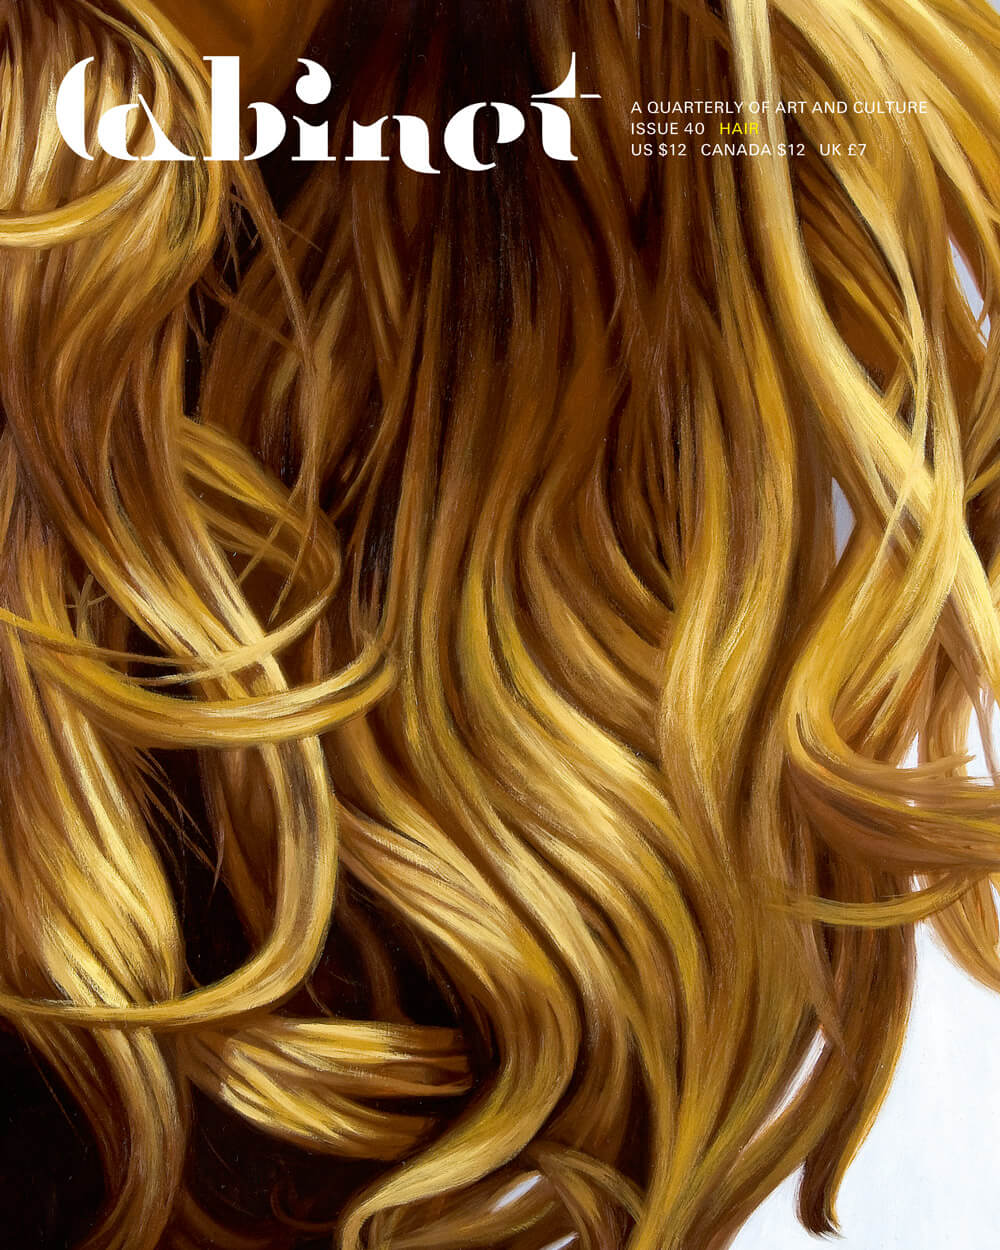 Artist Julia Jacquette’s 2009 painting Blond Hair (Long) depicting a close-up of locks of wavy blond hair.